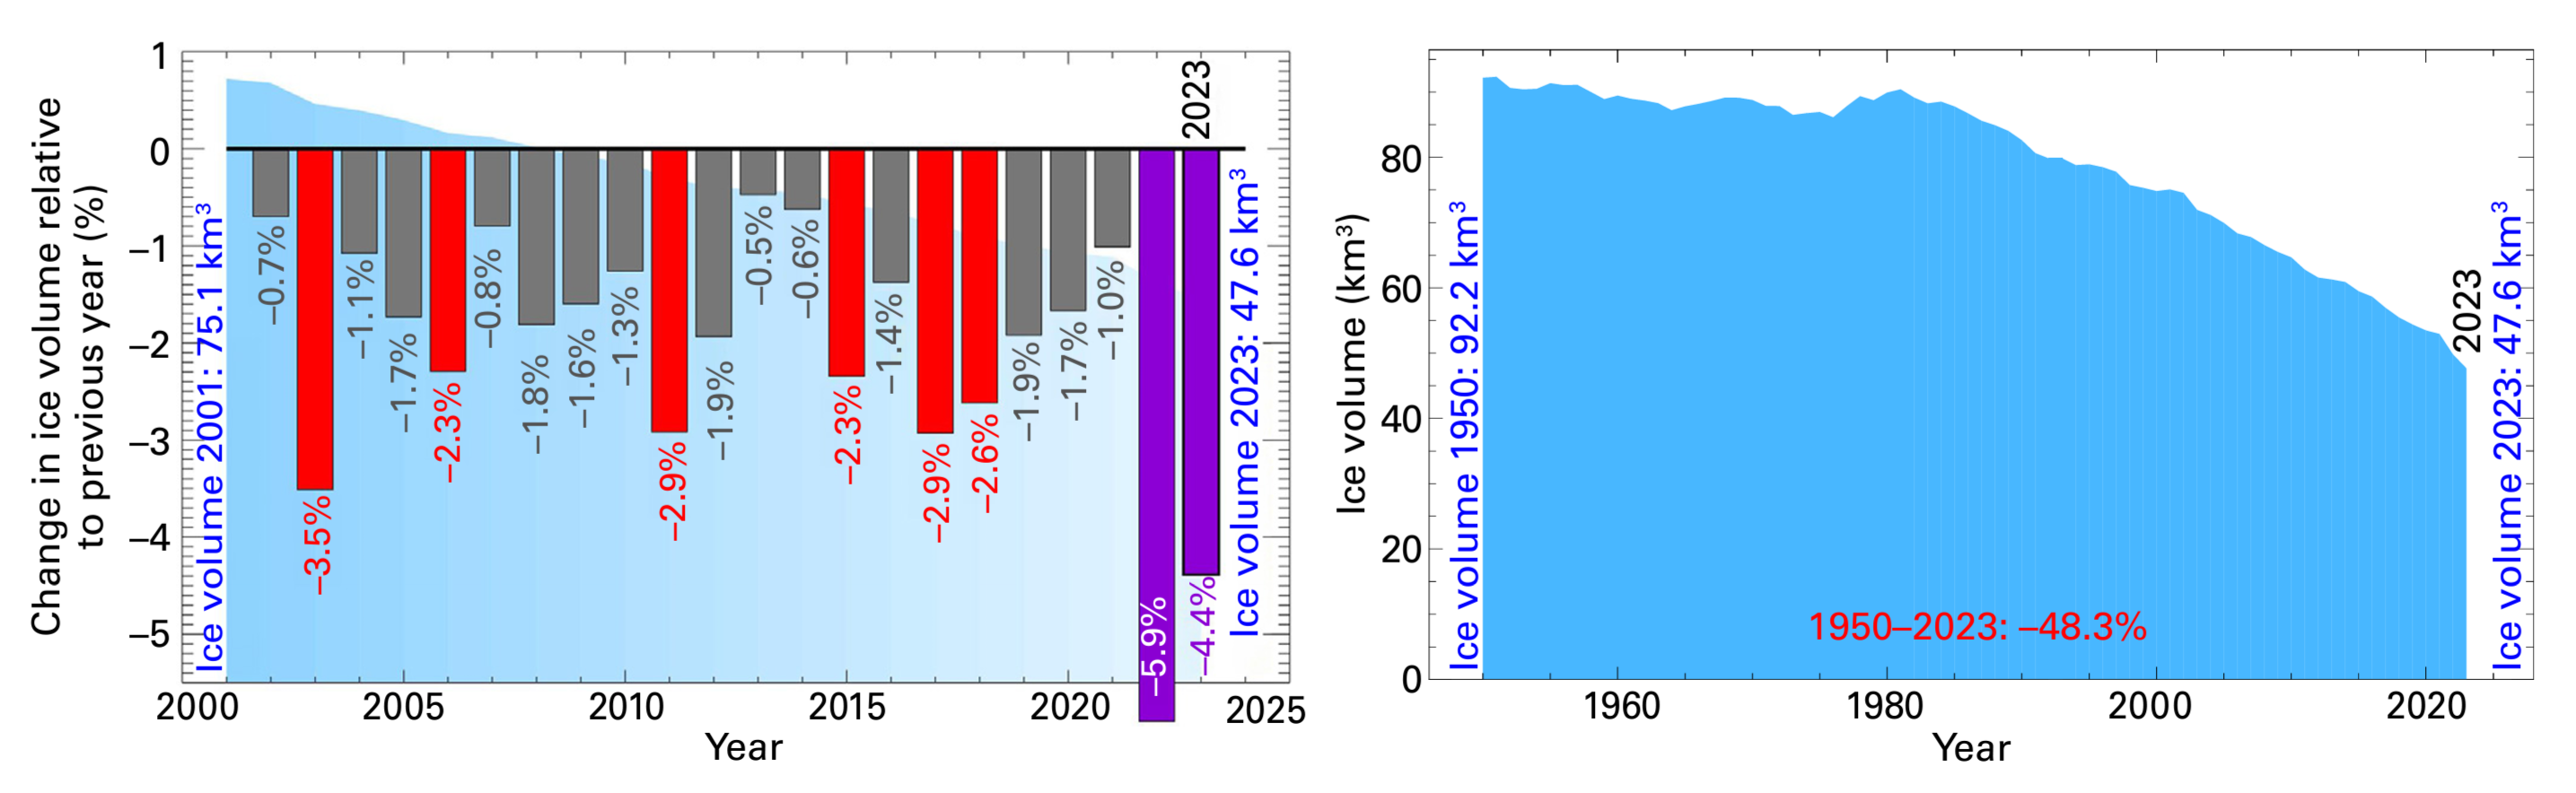 (left) Total annual loss of Swiss glaciers related to current ice volume. The vertical bars indicate the percentage change in ice volume relative to the previous year. Red and purple bars are the eight largest relative mass losses on record. The purple bars are the relative mass losses for 2022 and 2023. The blue shaded area in the background represents overall ice volume as also shown in the right-hand graph. (right) Overall ice volume for Swiss glaciers 1950-2023. Data: Matthias Huss, based on Glacier Monitoring Switzerland, 2022: Swiss Glacier Mass Balance (Release 2023), https:// doi.org/10.18750/massbalance.2022.r2022. Graphic: WMO